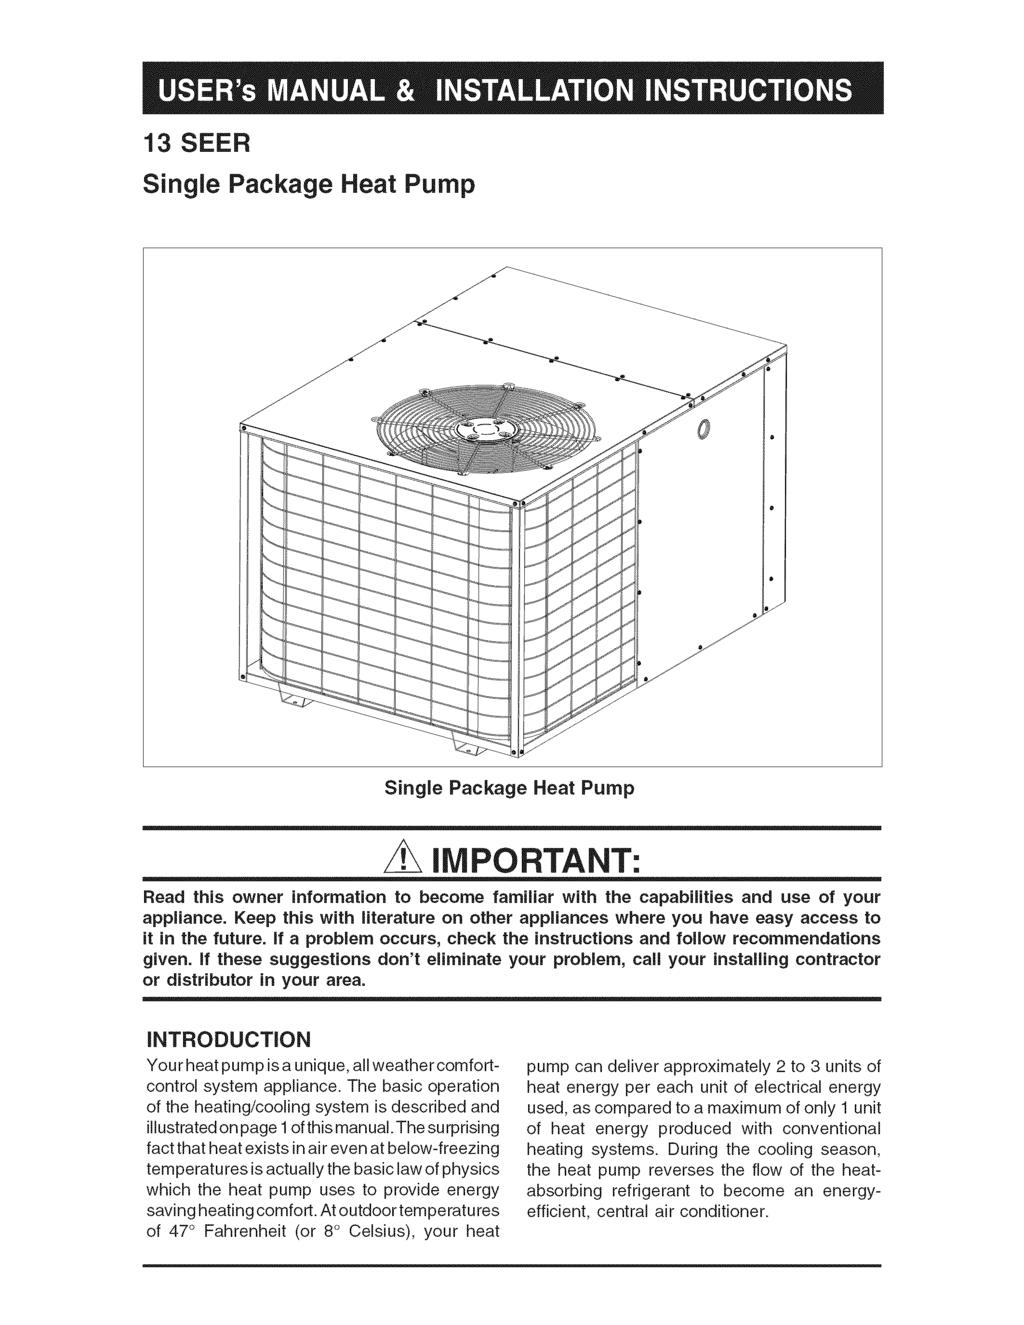 13 SEER Single Package Hea Pump Single Package Hea Pump important: Read his owner informaion o become familiar wih he capabiliies and use of your appliance.